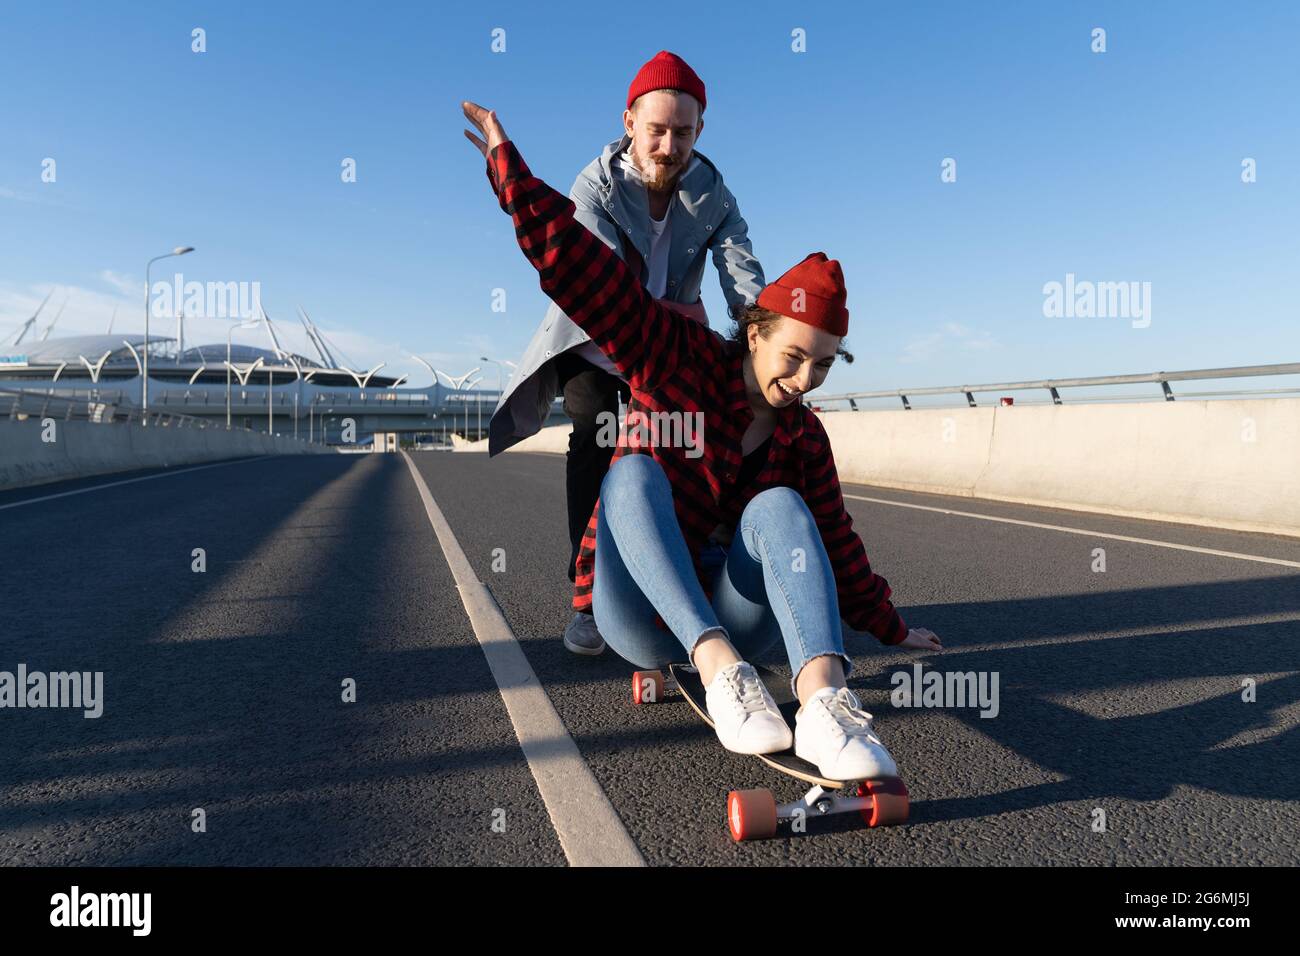 Stylish man and woman skating on longboard enjoy time together. Urban fashion and trendy activity Stock Photo